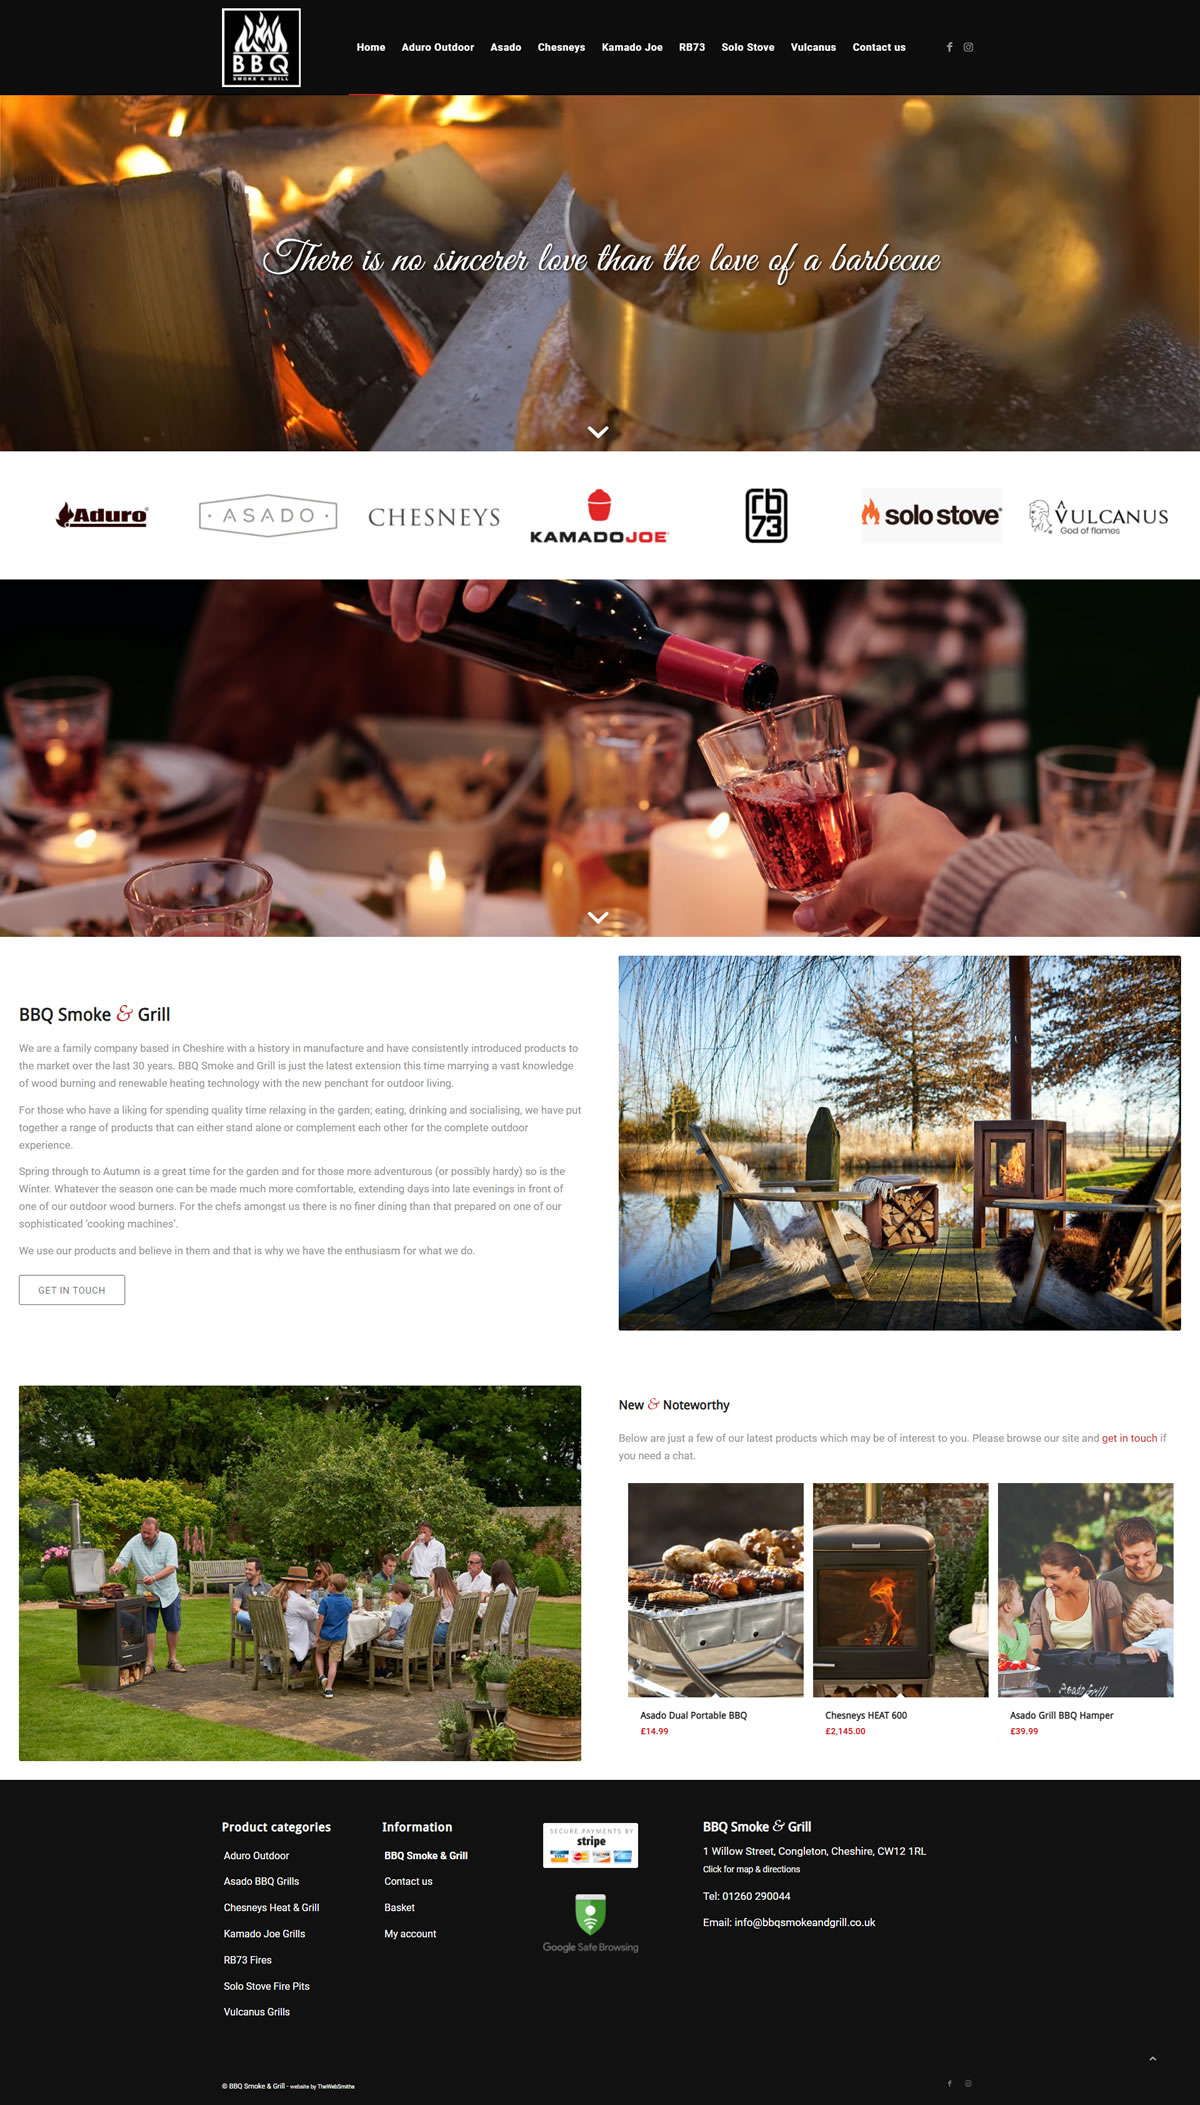 A new website for BBQ Smoke & Grill